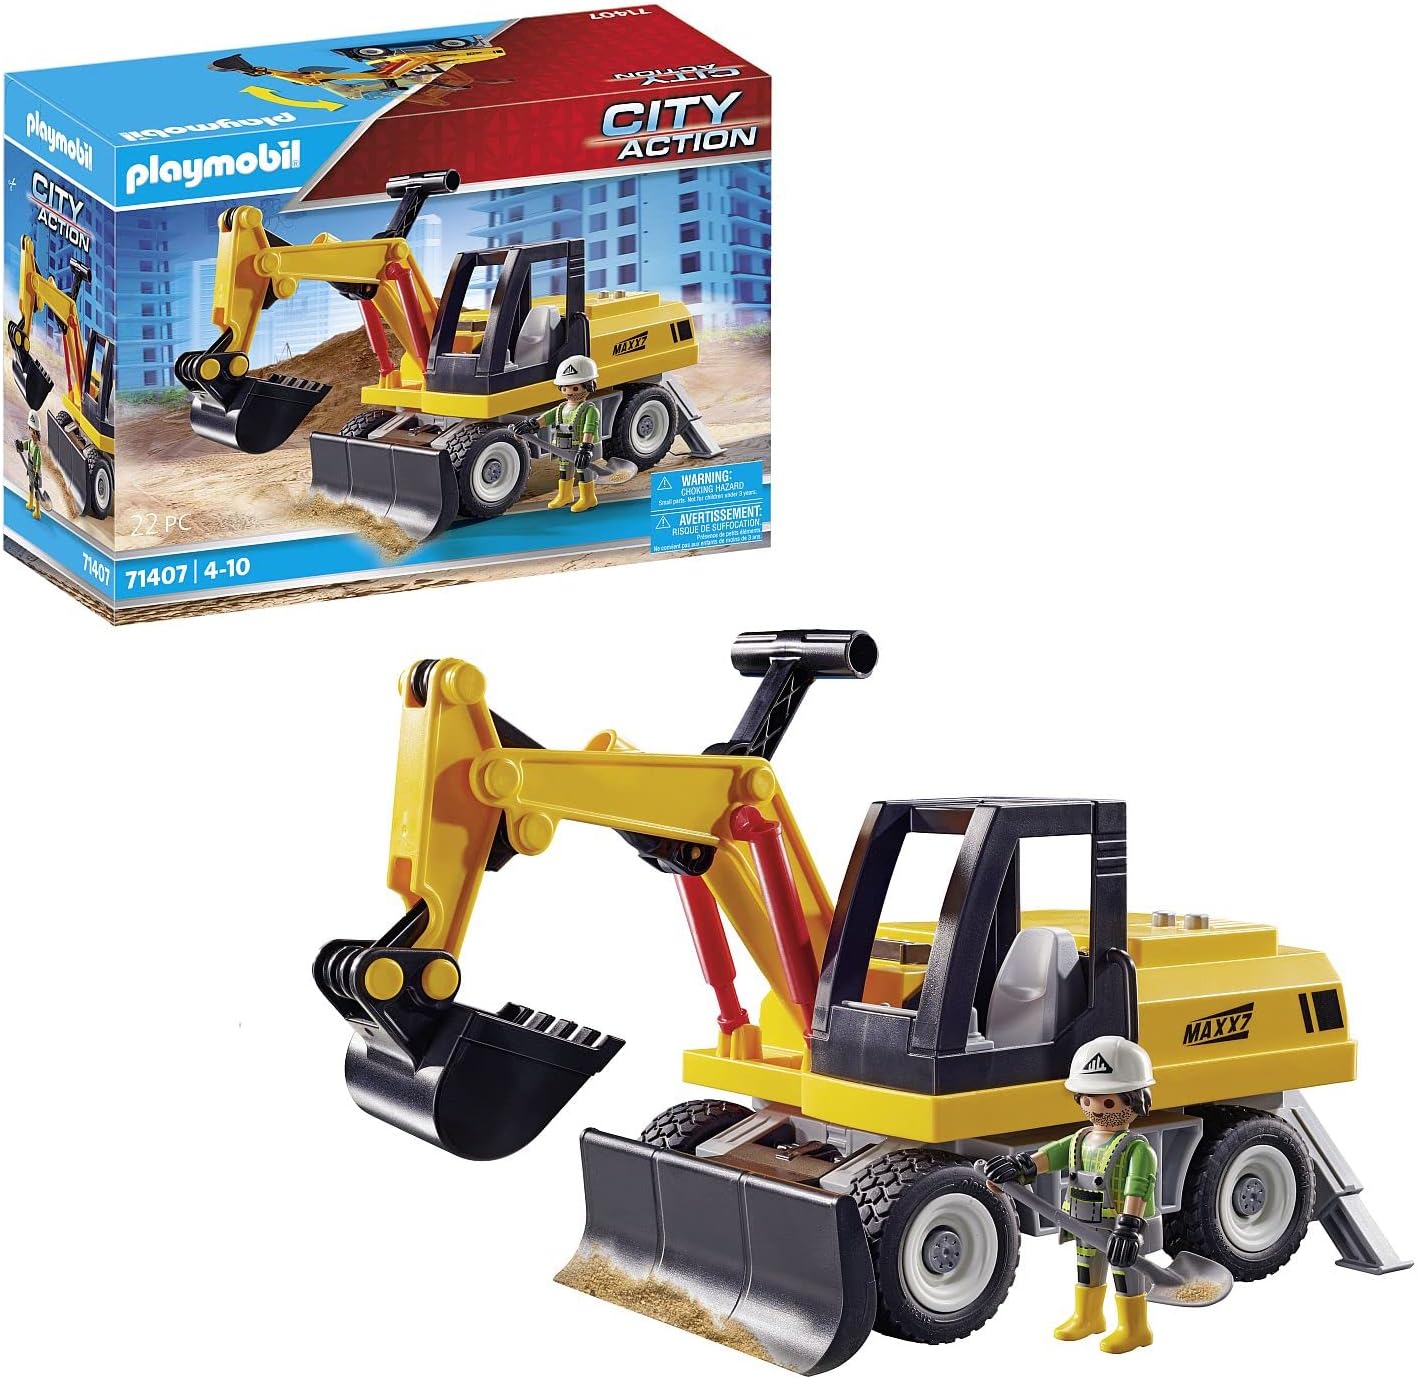 PLAYMOBIL City Action 71407 Excavator with 360° Rotating Assembly, Shovel and Support Feet, Play Set for Creative Building Fans, Toy for Children from 4 Years